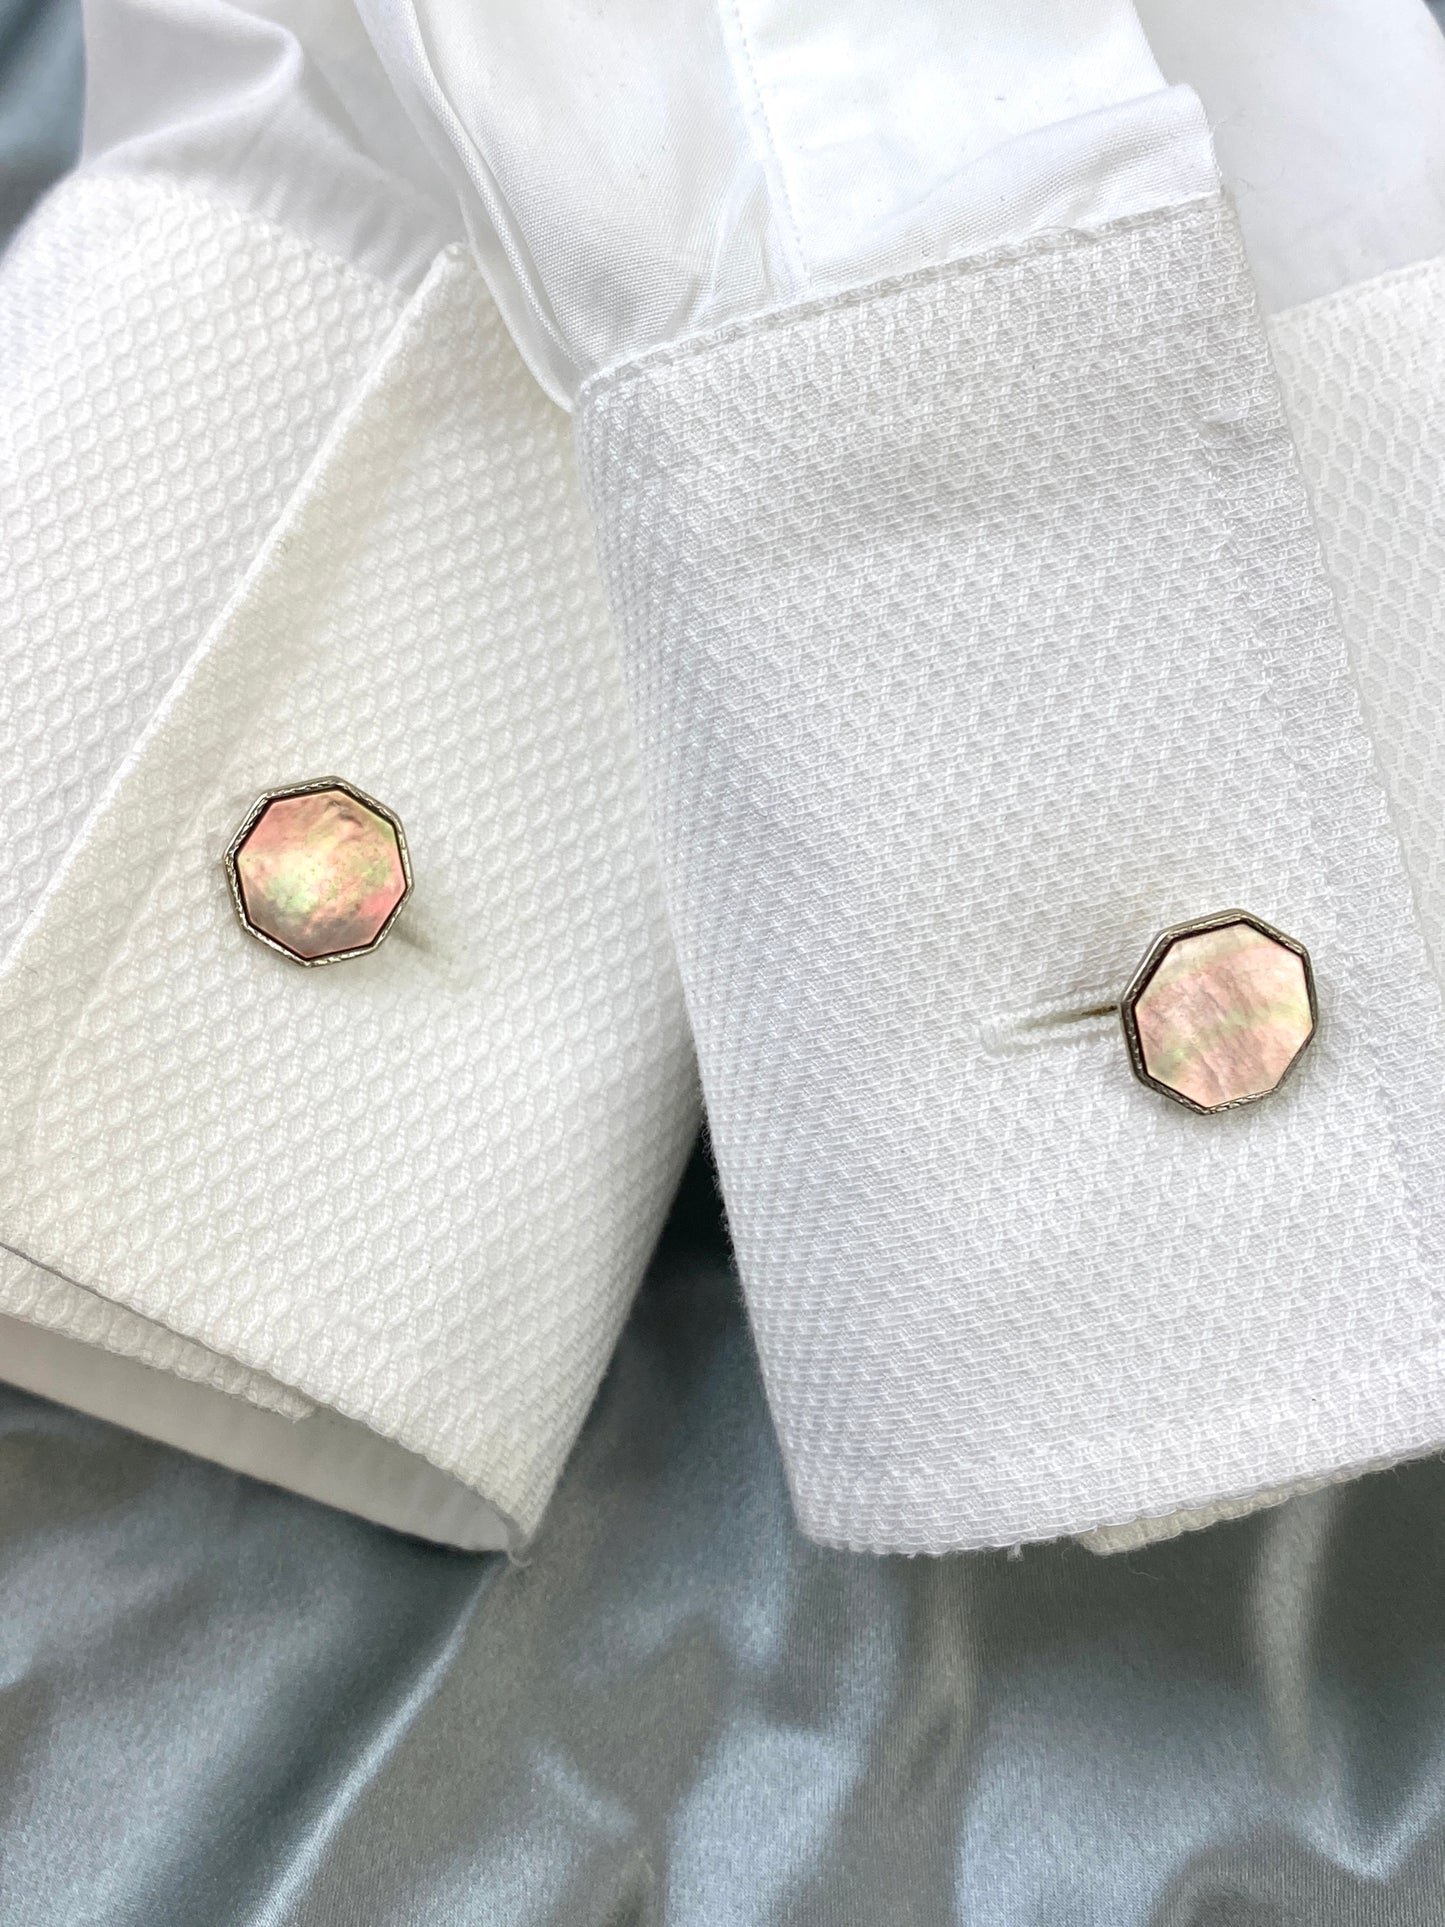 Vintage Edwardian 1910s Men's Cufflinks, Hexagonal Silver with Mother of Pearl Inlay, Gold Plated